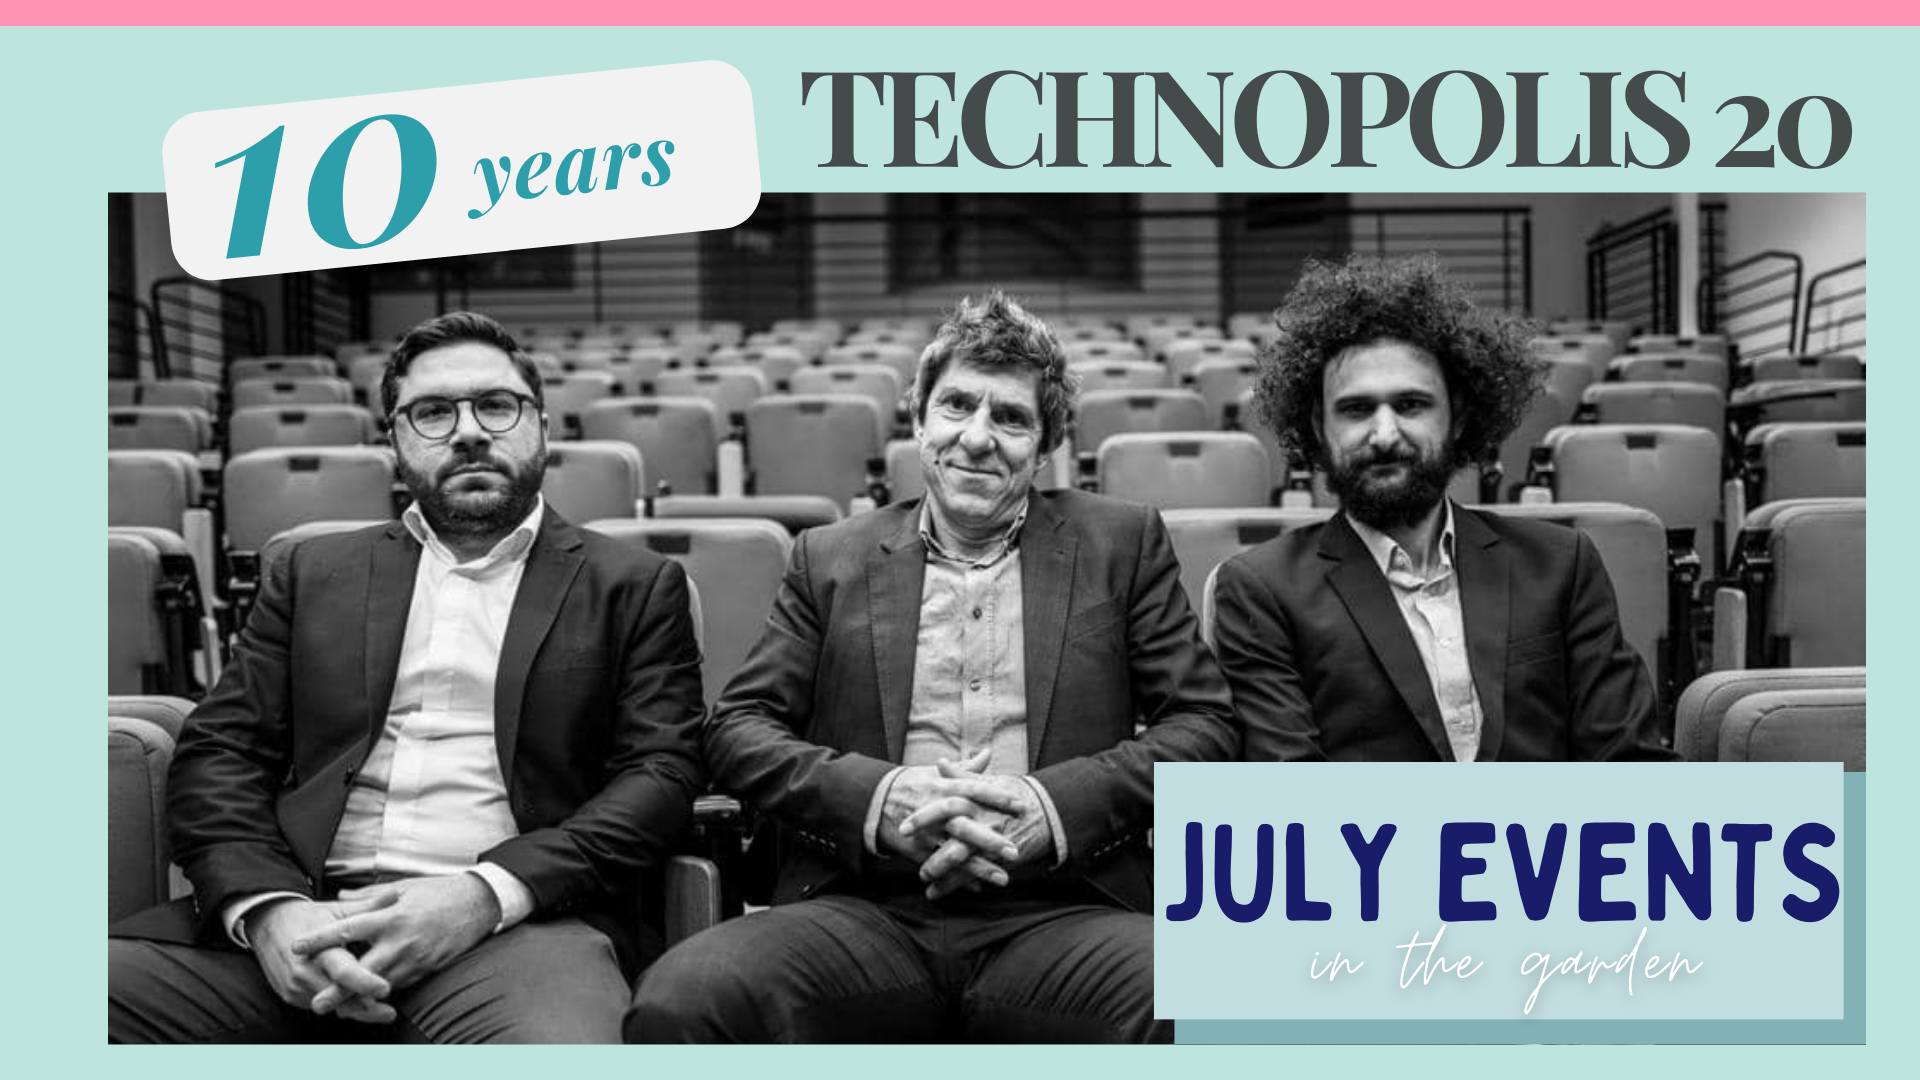 A month of music as Technopolis 20 celebrates 10 years